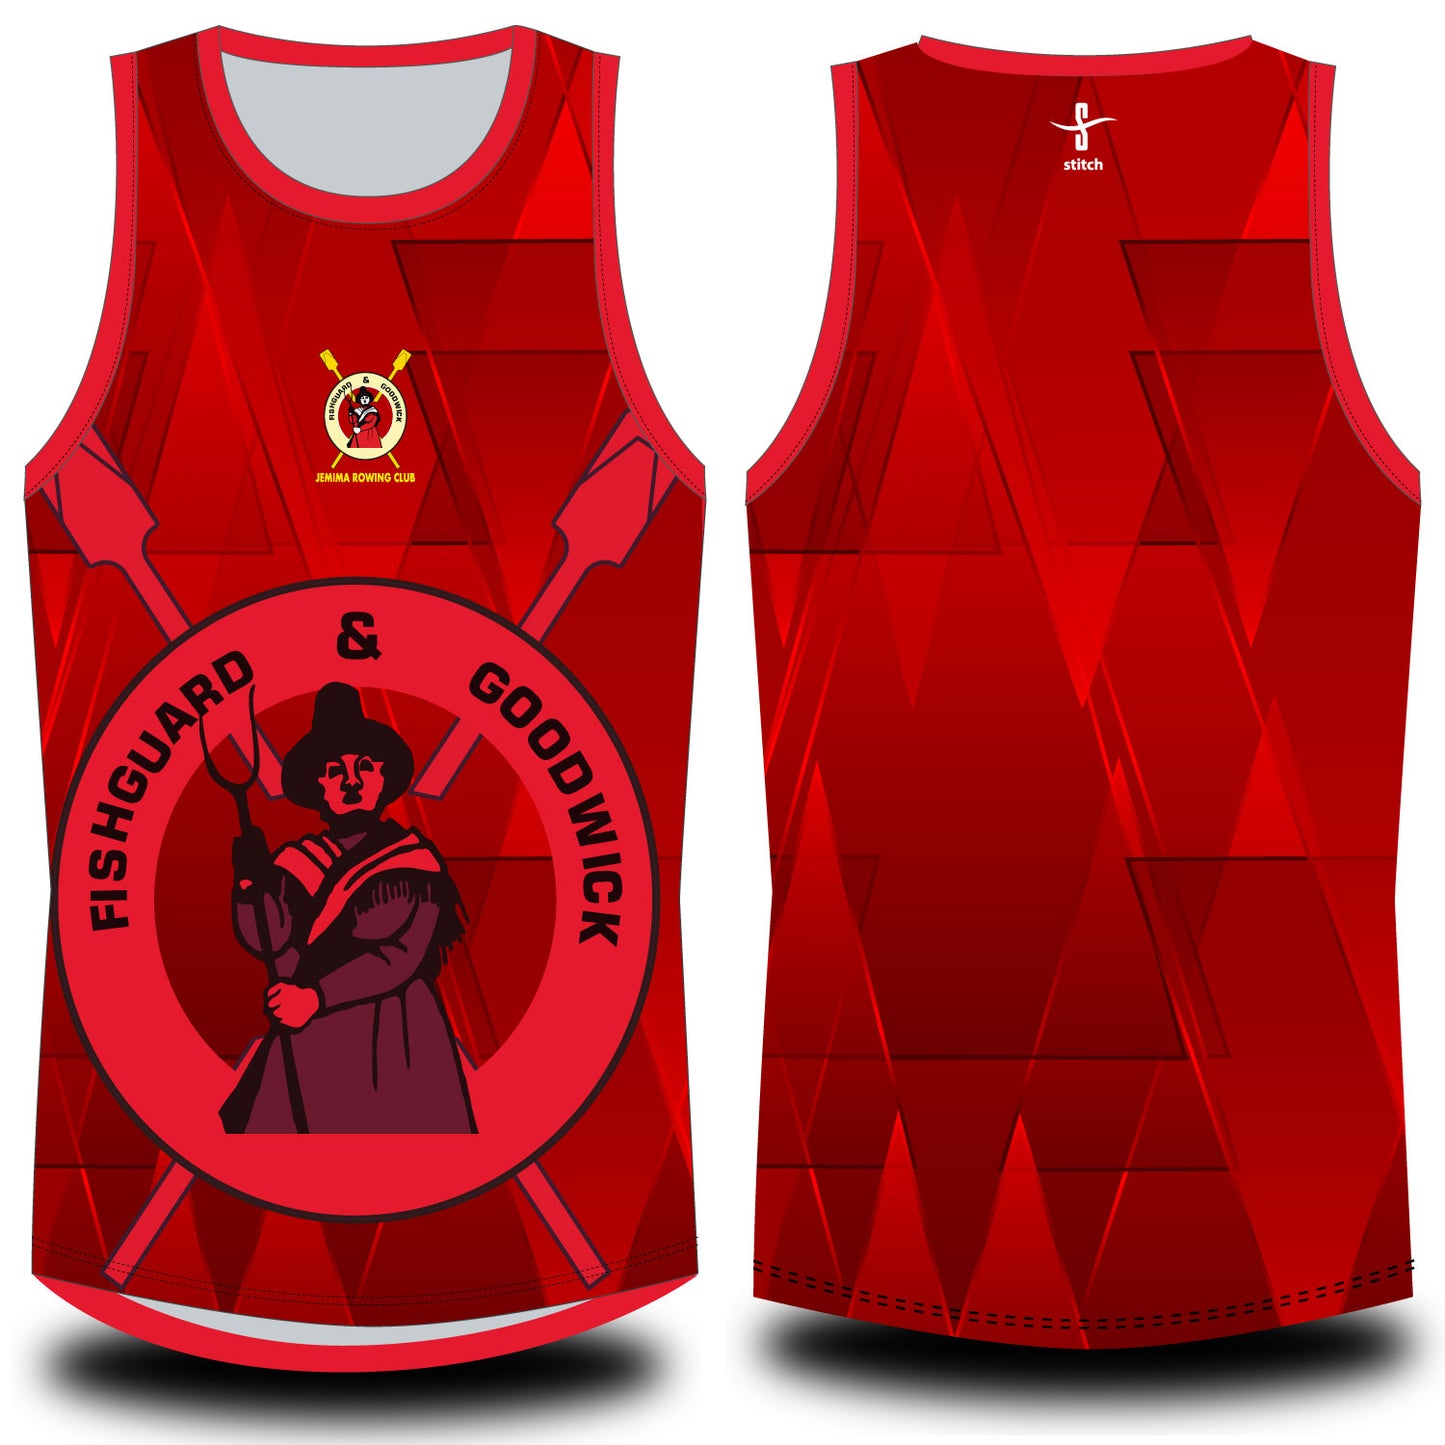 Fishguard and Goodwick Sublimated Triangle Vest